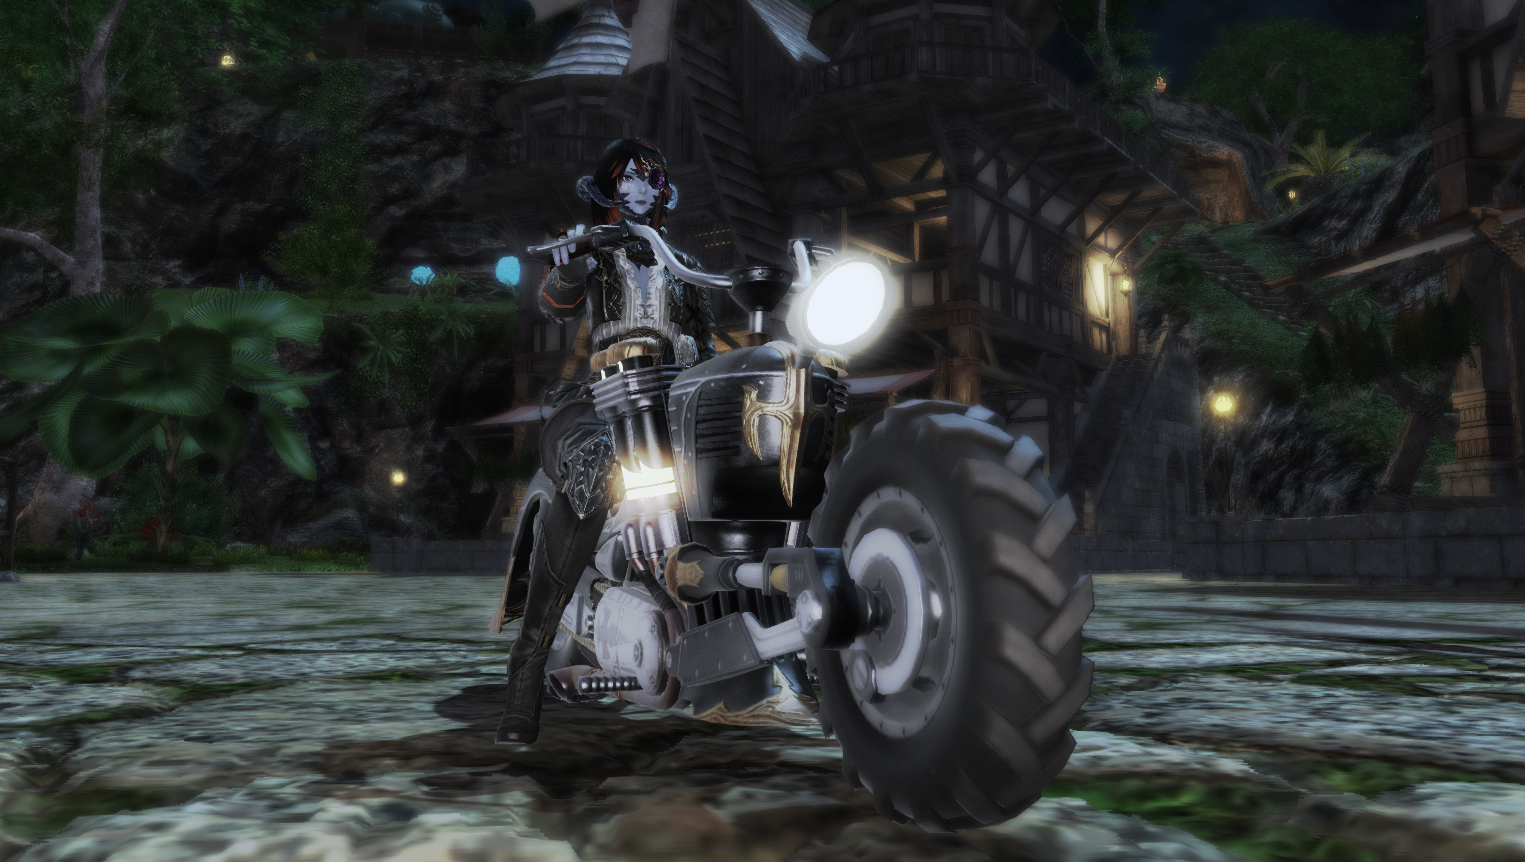 How to get the Garlond GL-II Mount in Final Fantasy XIV